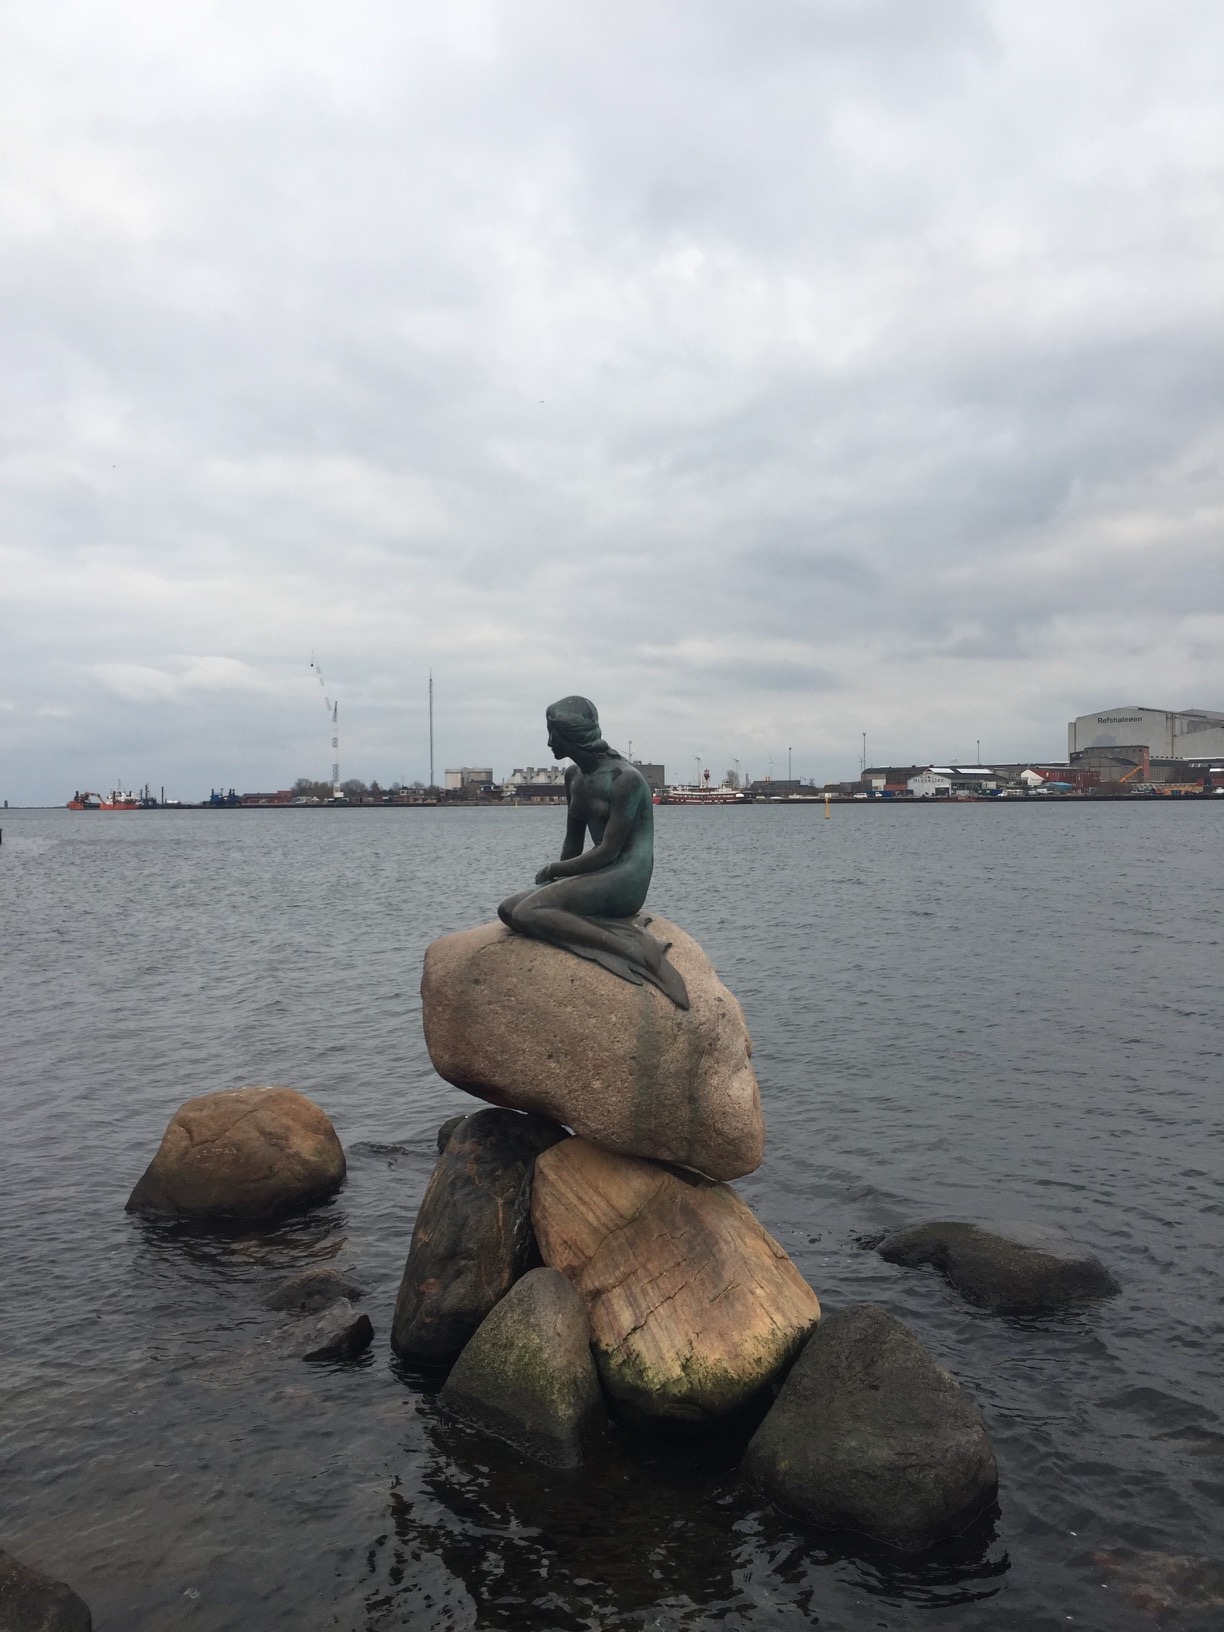 A bronze statue of a female mermaid rests on a rock in a harbor.